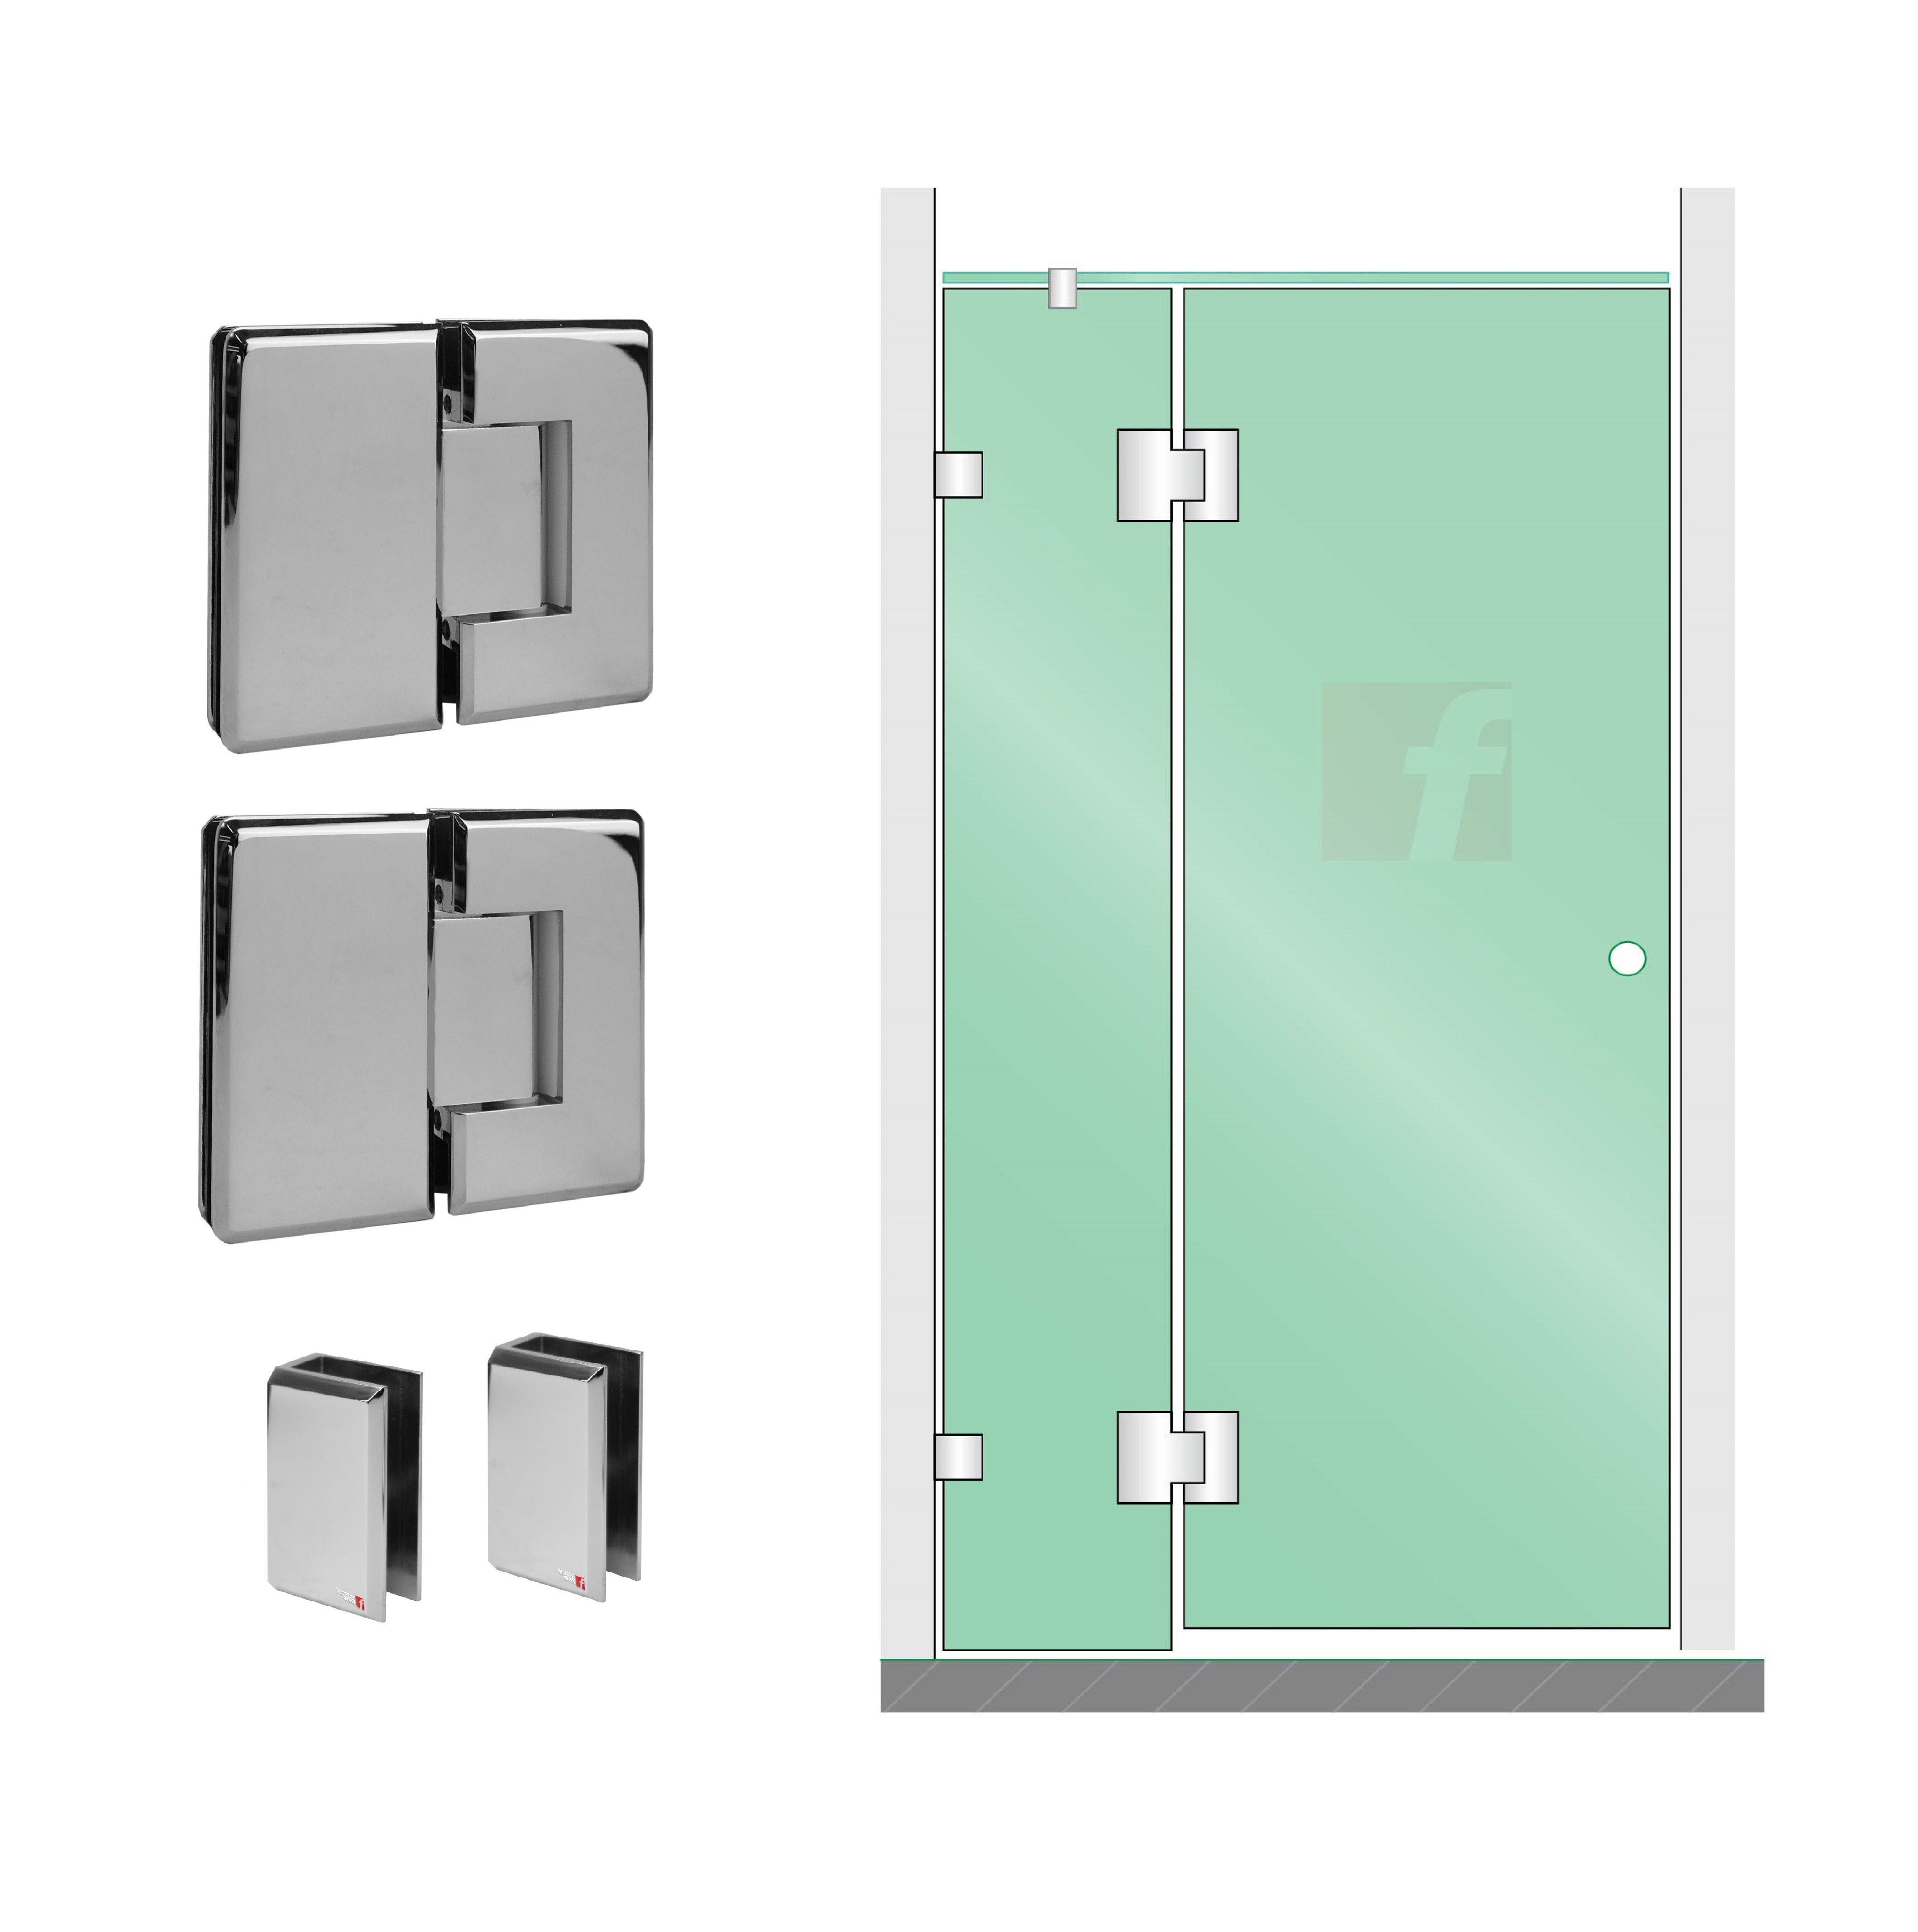 2 PANEL A (IN-LINE) CHROME WITH BEVELED EDGE HARDWARE